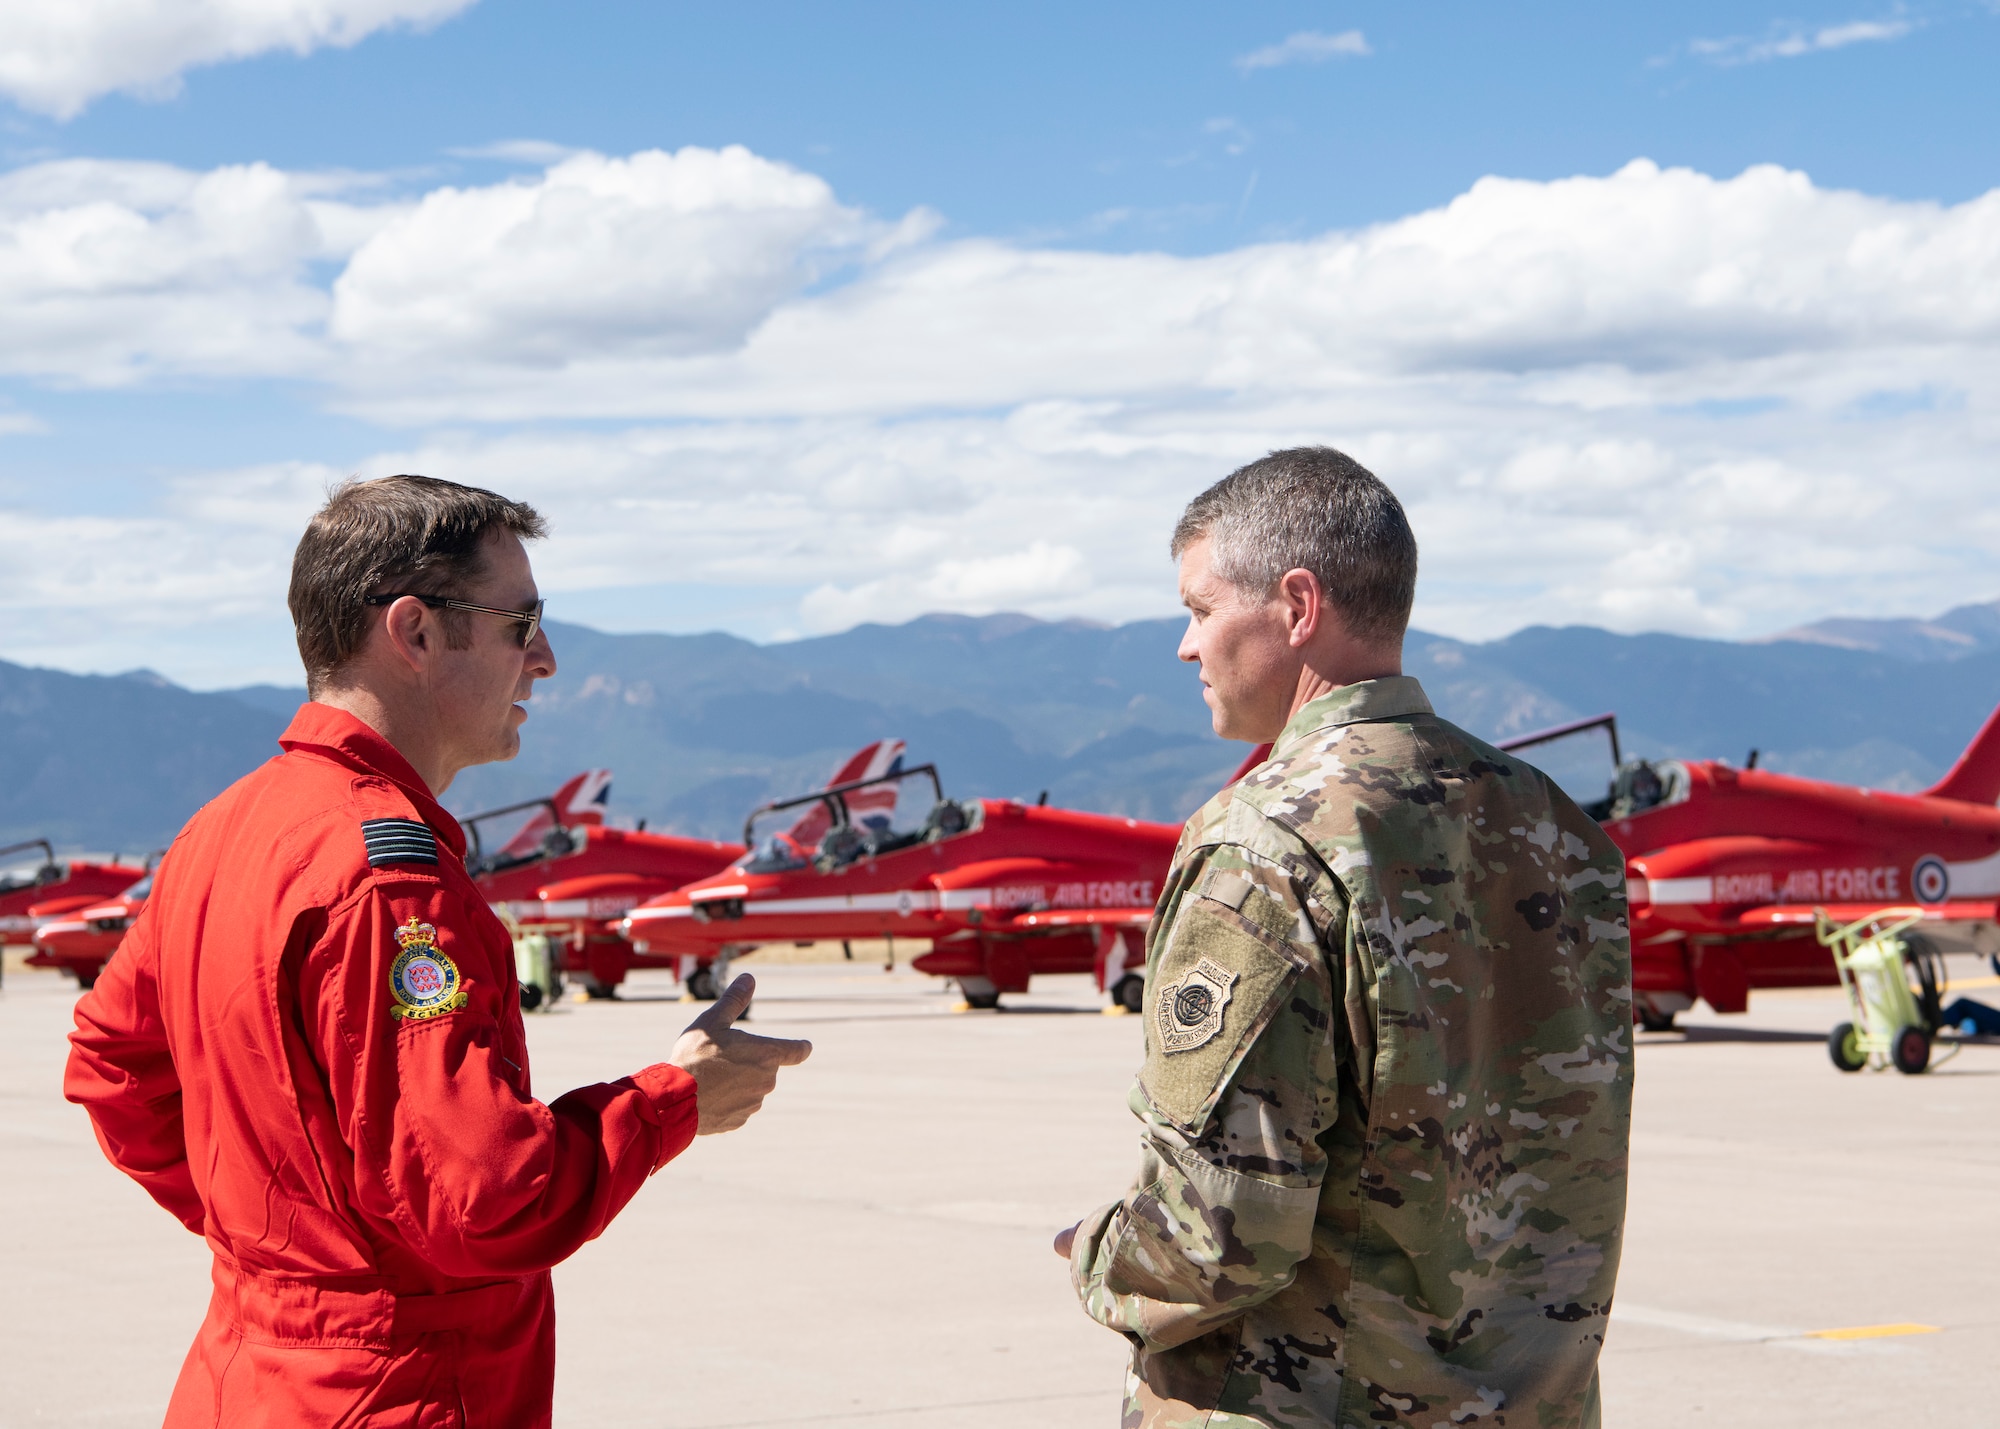 Wing Commander Andrew Keith, left, leader of the Royal Air Force demonstration team, the Red Arrows, speaks with 21st Space Wing vice commander Col. Sam Johnson Sept. 16, 2019 at Peterson Air Force Base, Colorado. The Red Arrows stopped at Peterson AFB as part of their North American tour. (U.S. Air Force photo by Heather Heiney)